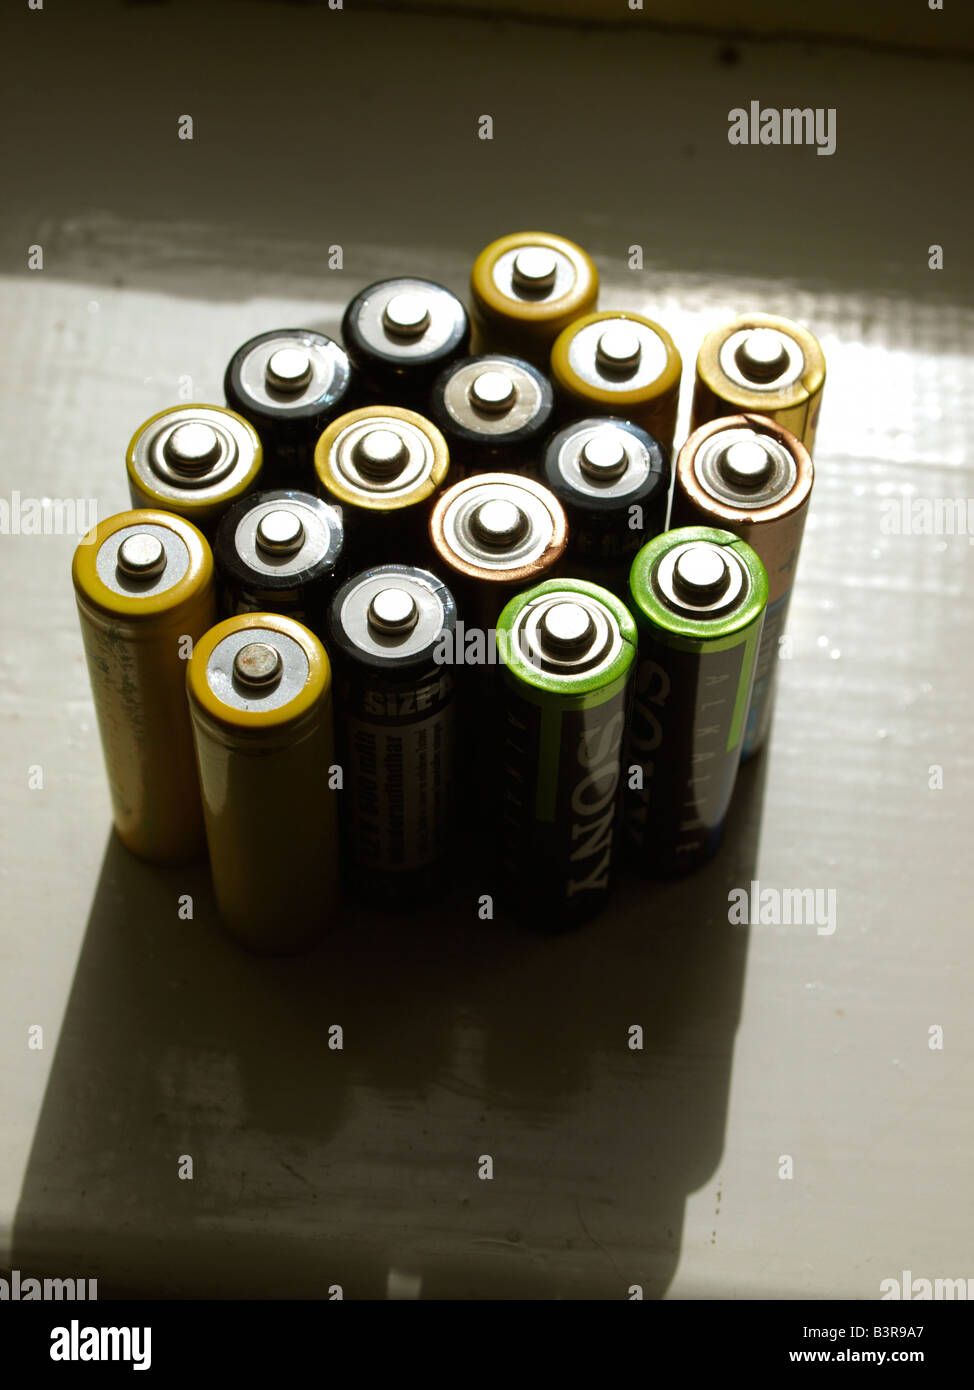 Rechargeable batteries Stock Photo